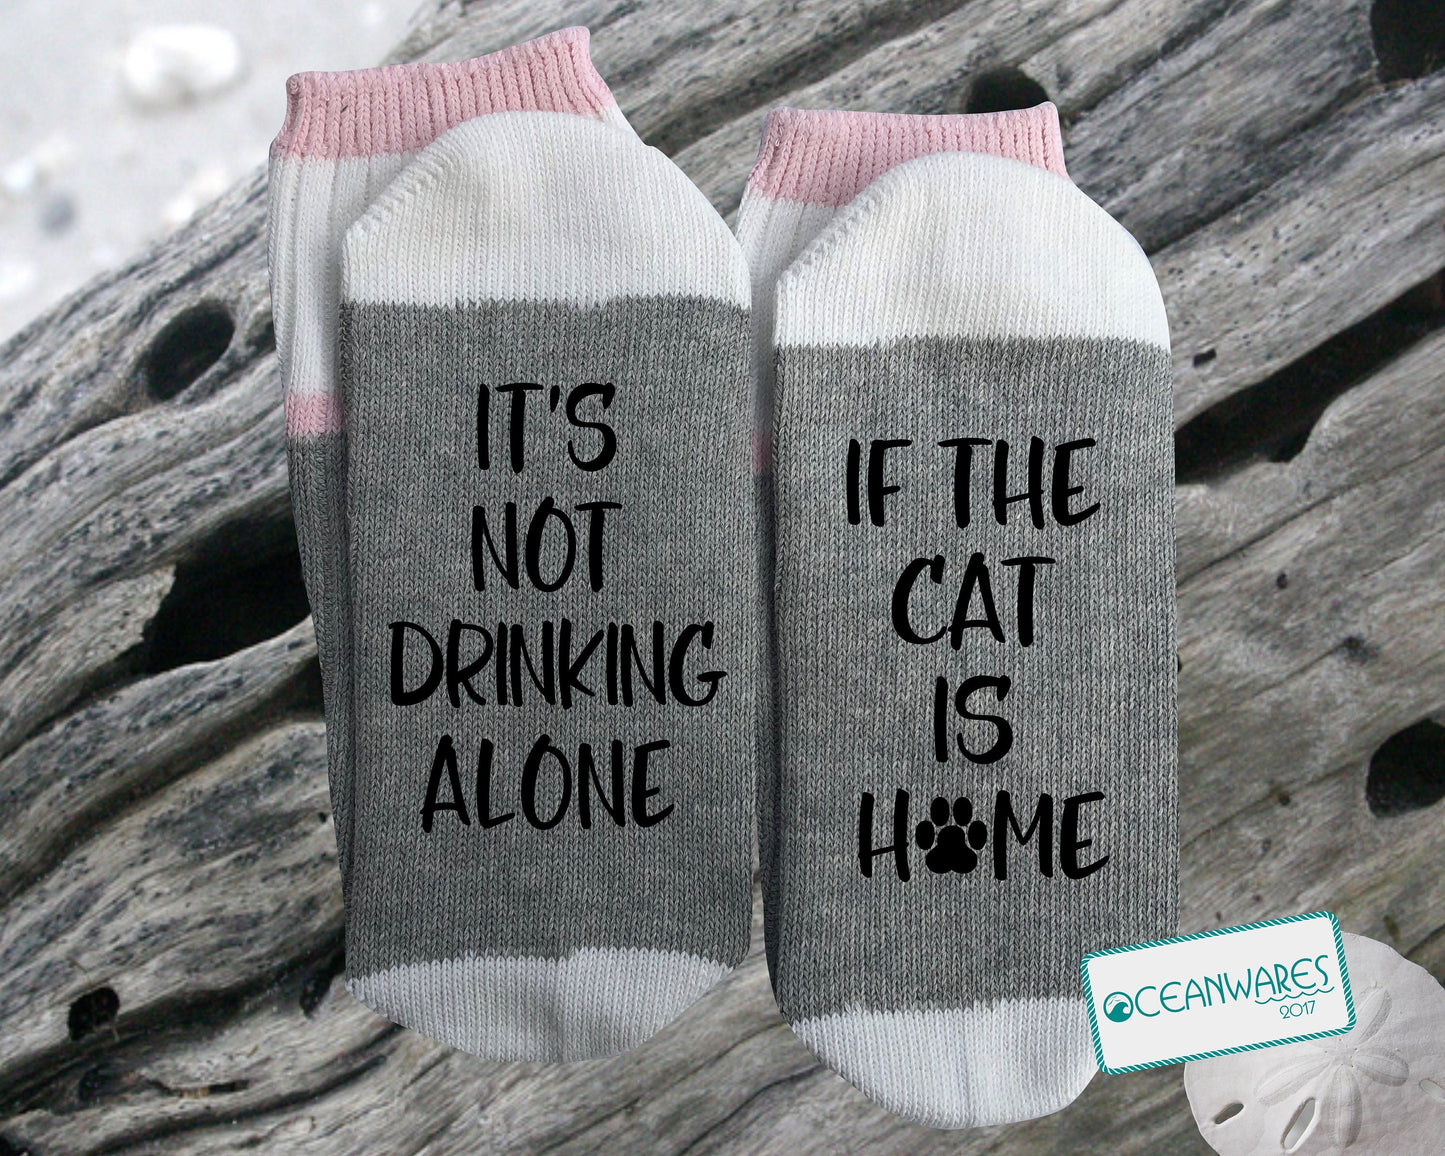 Cat Mom, It's not drinking alone if the cat is home, SUPER SOFT NOVELTY WORD SOCKS.